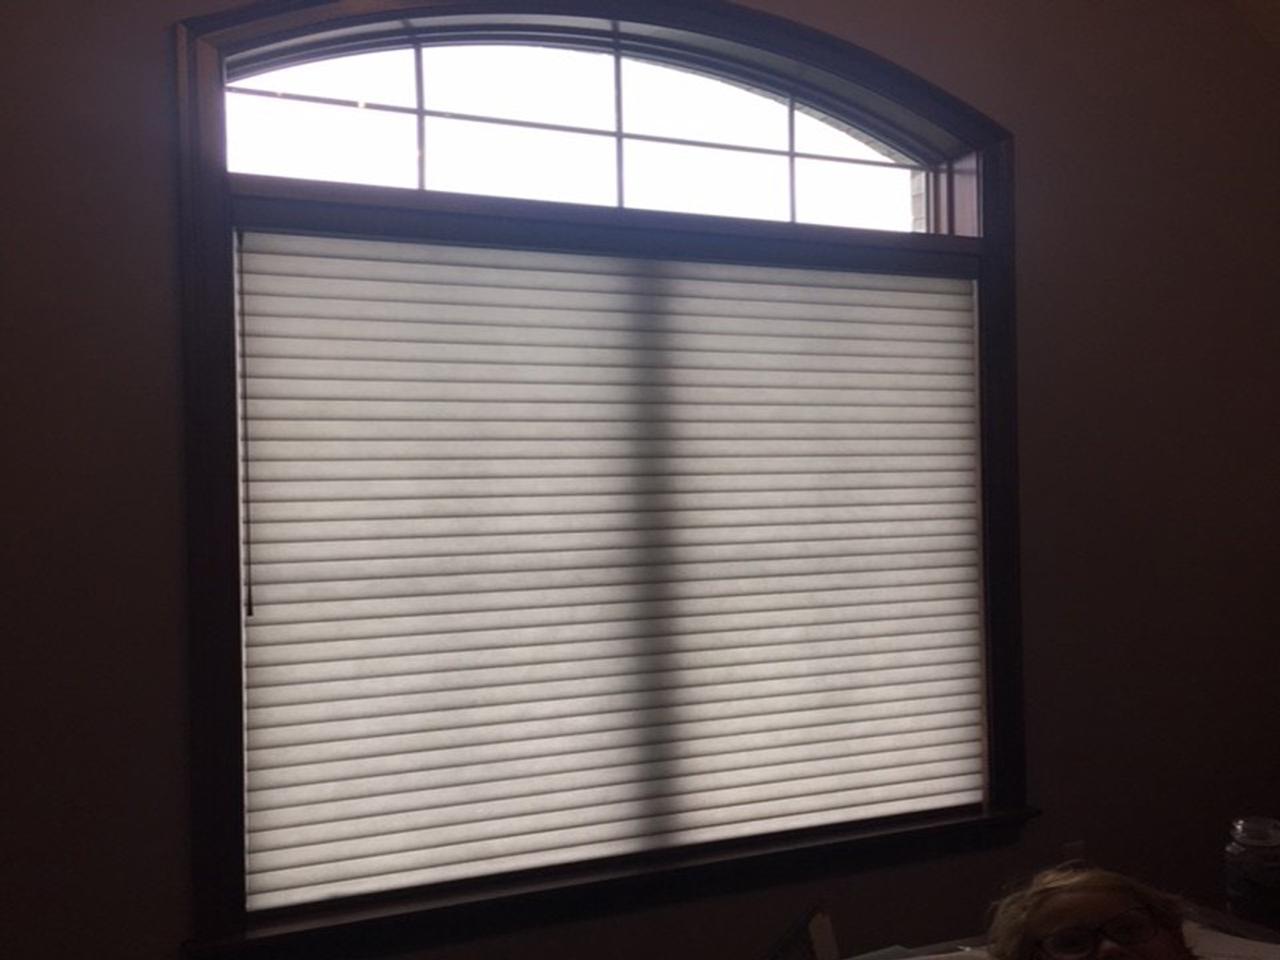 Honeycomb shades on arched window